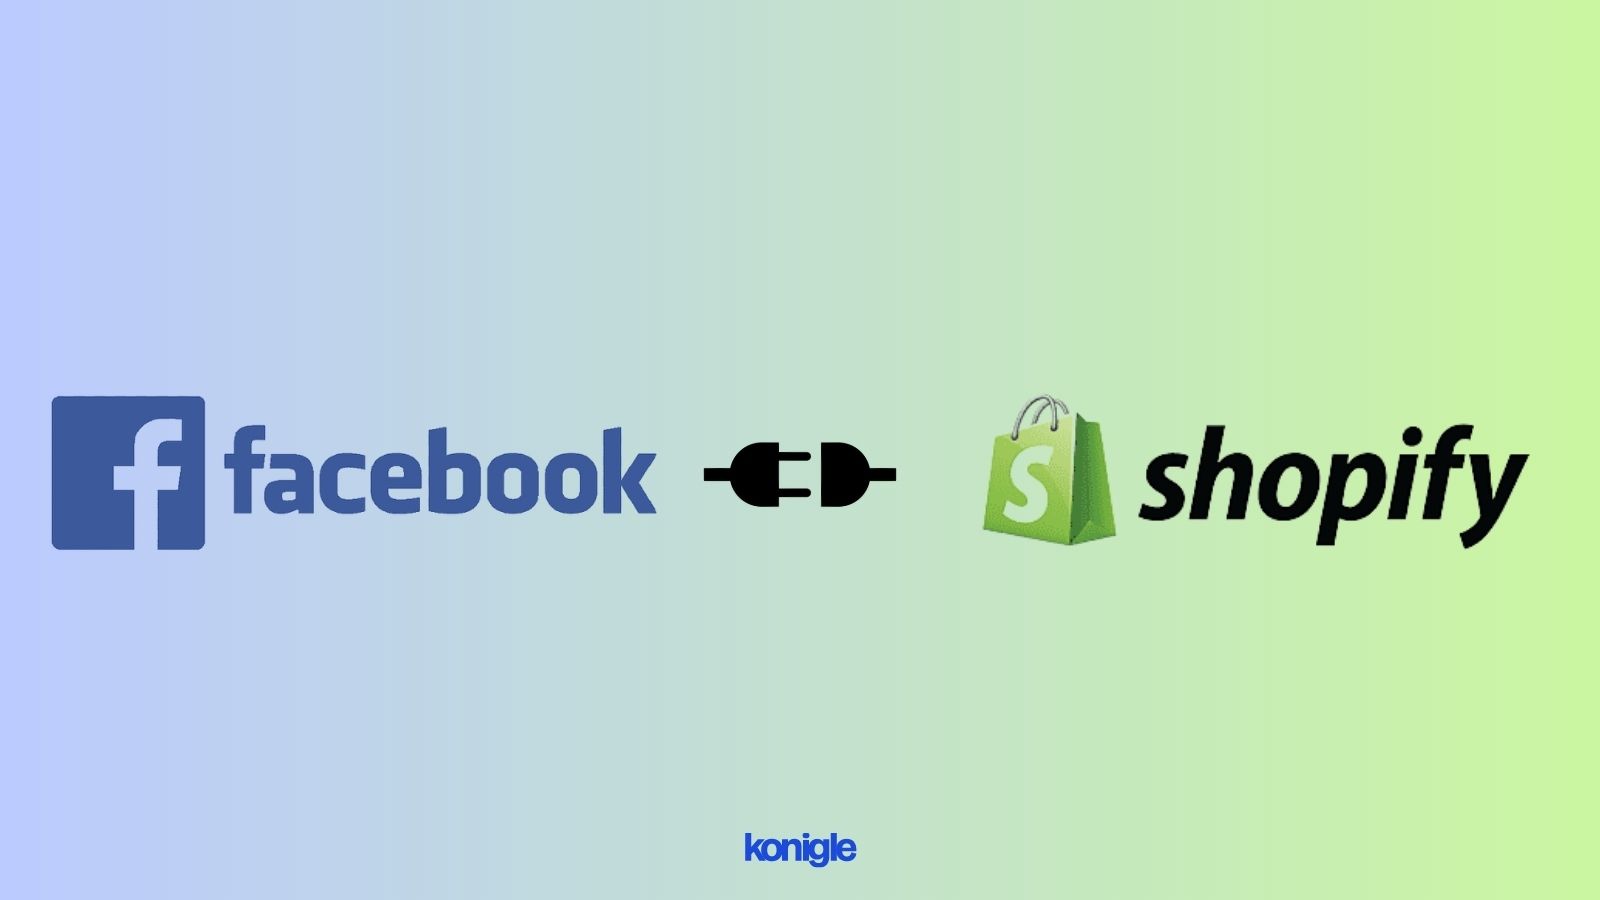 How to connect Facebook to shopify?